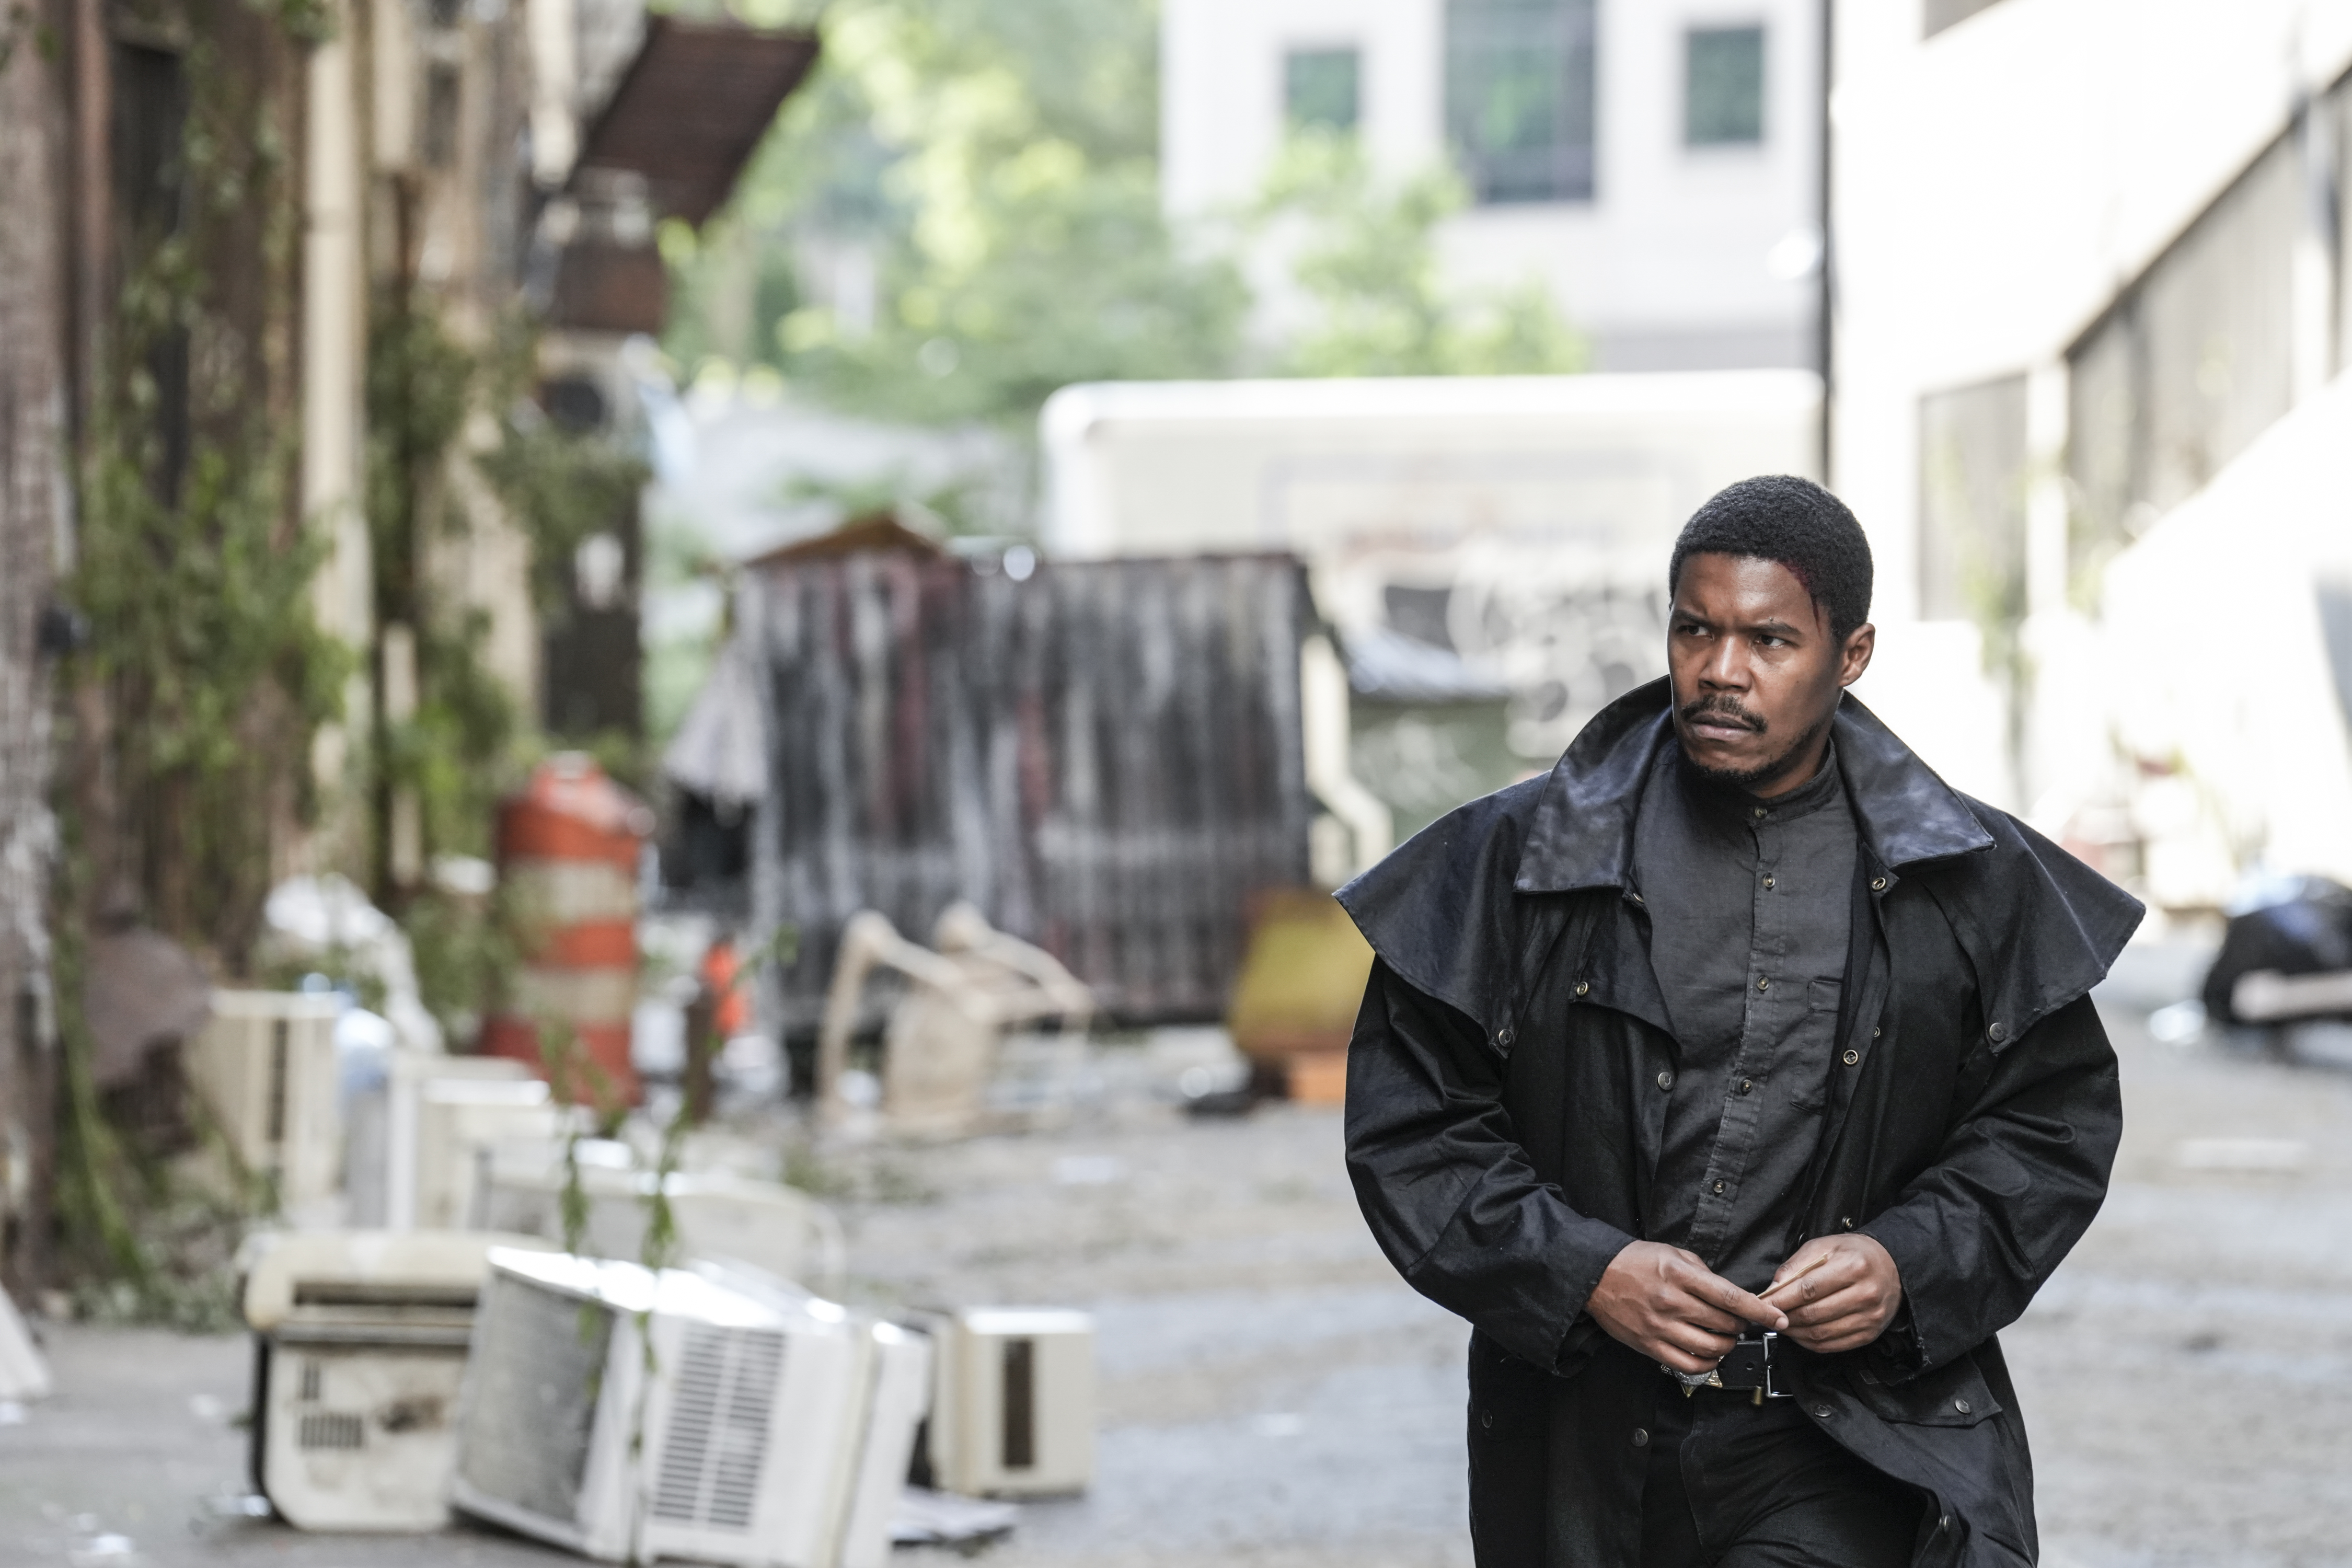 Image of Gaius Charles as Perlie Armstrong on AMC's 'The Walking Dead: Dead City.' We see him from the waist up. He is a Black man wearing a black jacket that looks like a cloak, and a grey button-down shirt. He's walking down an alley and holding a corner of his jacket with both hands. He has close-cropped hair and a mustache. He's looking sternly off to the side. 